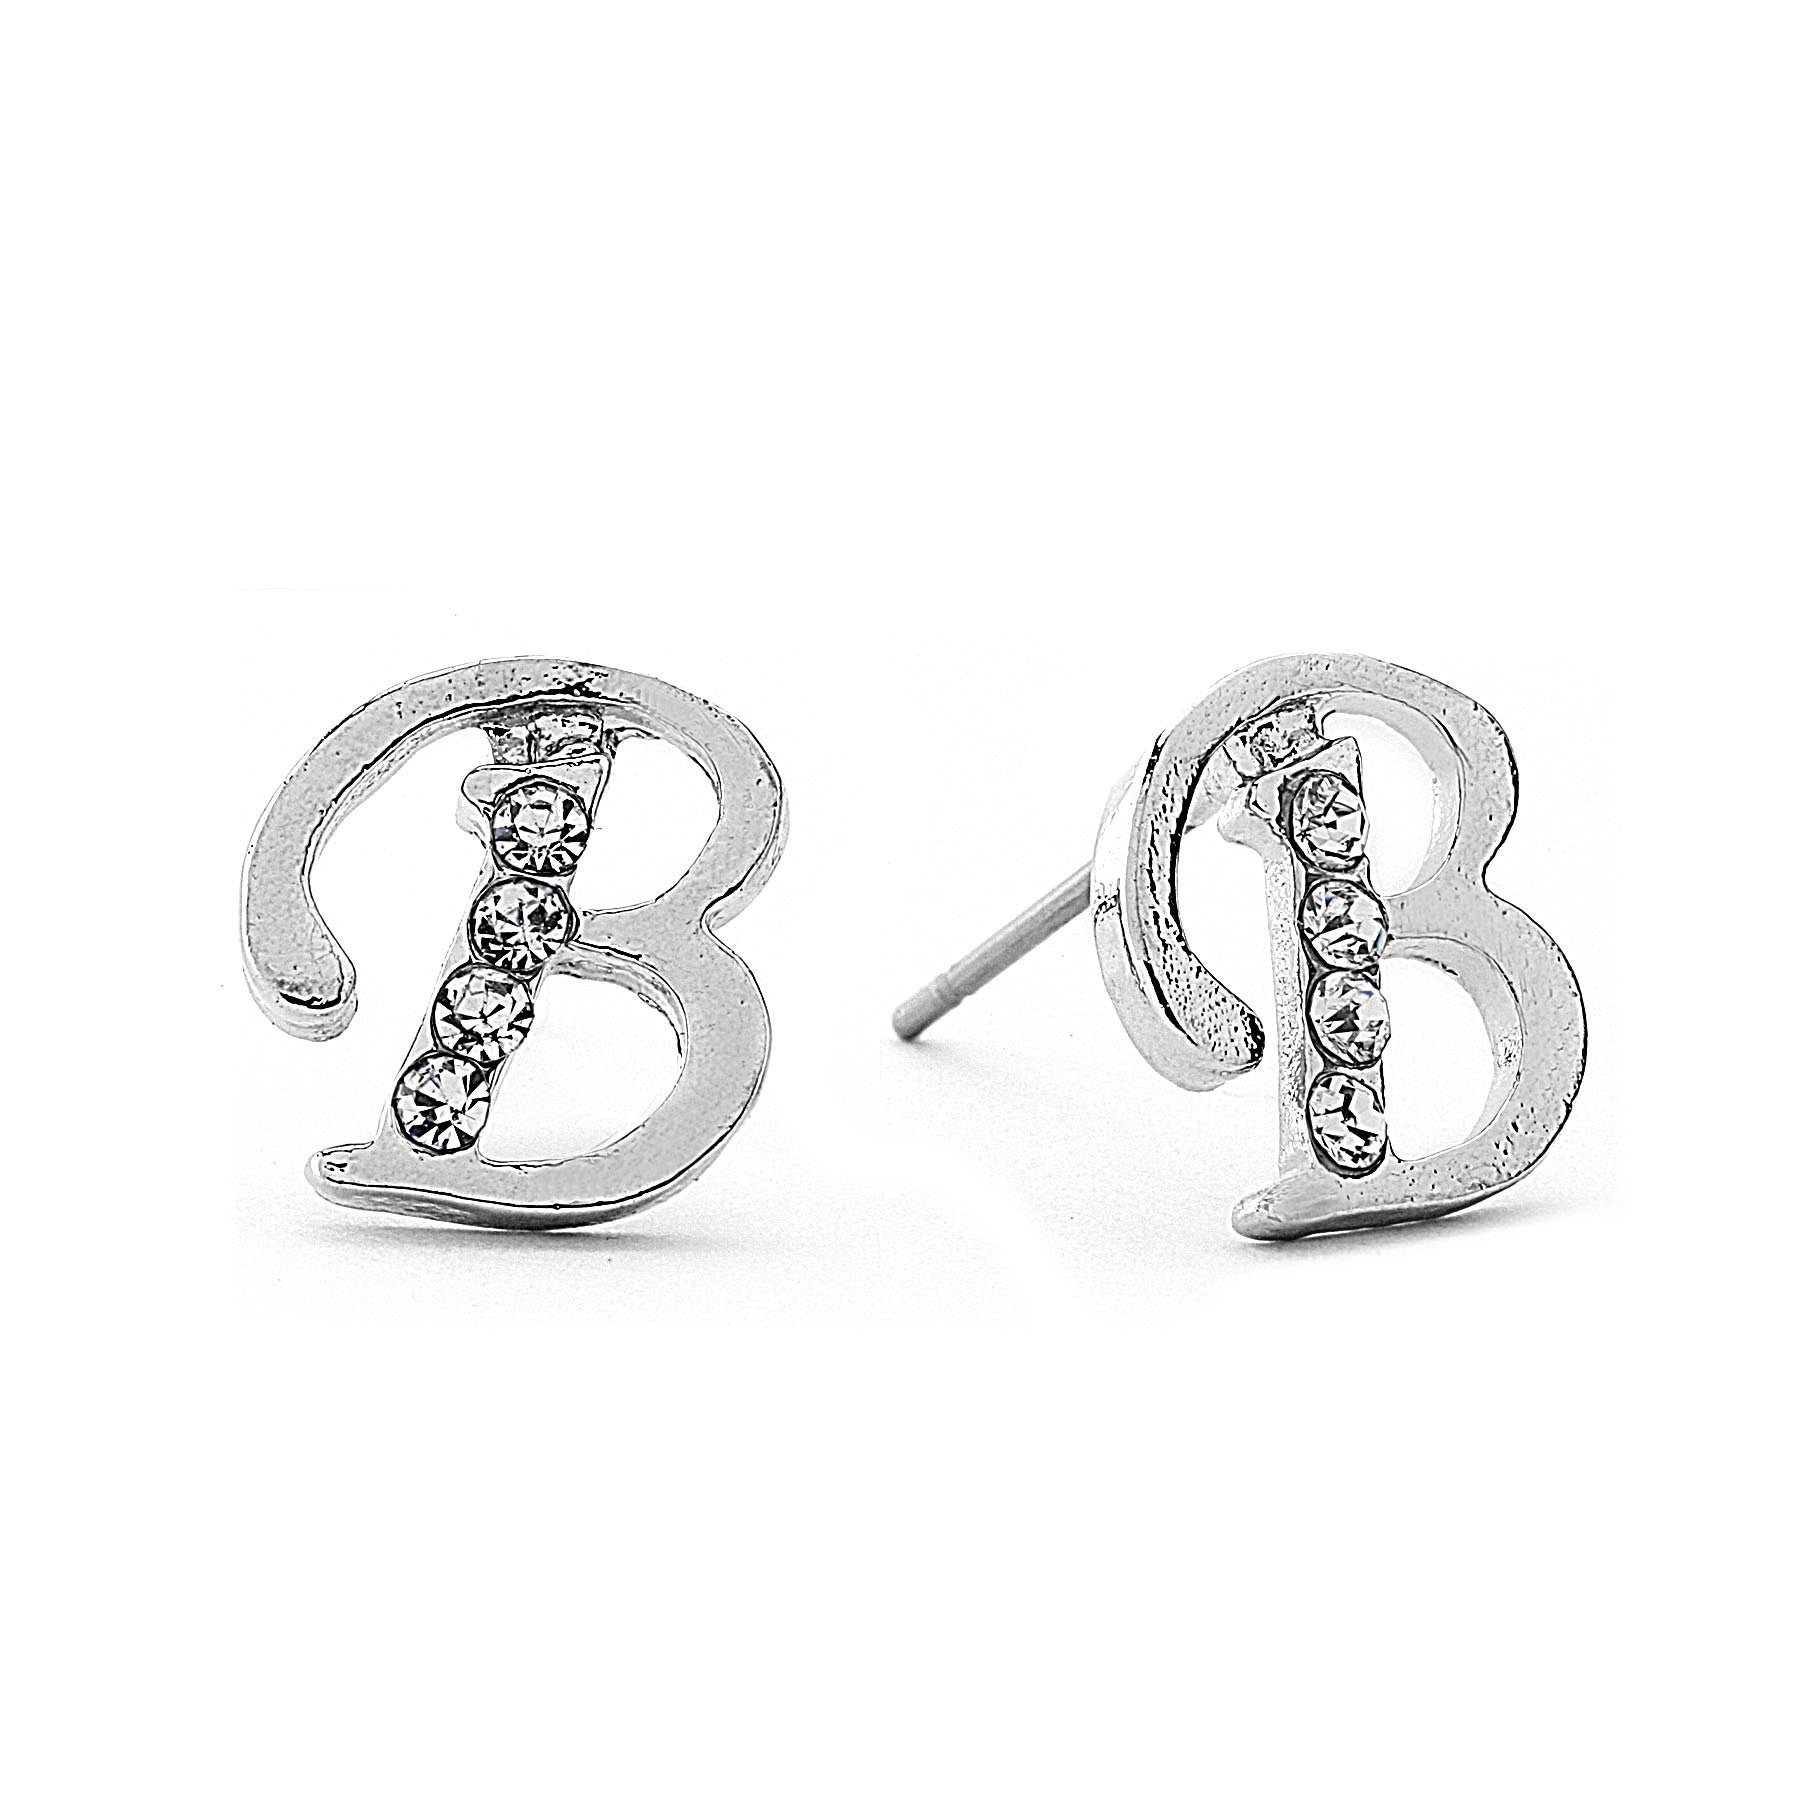 INITIAL EARRING - CZ Accents (B)